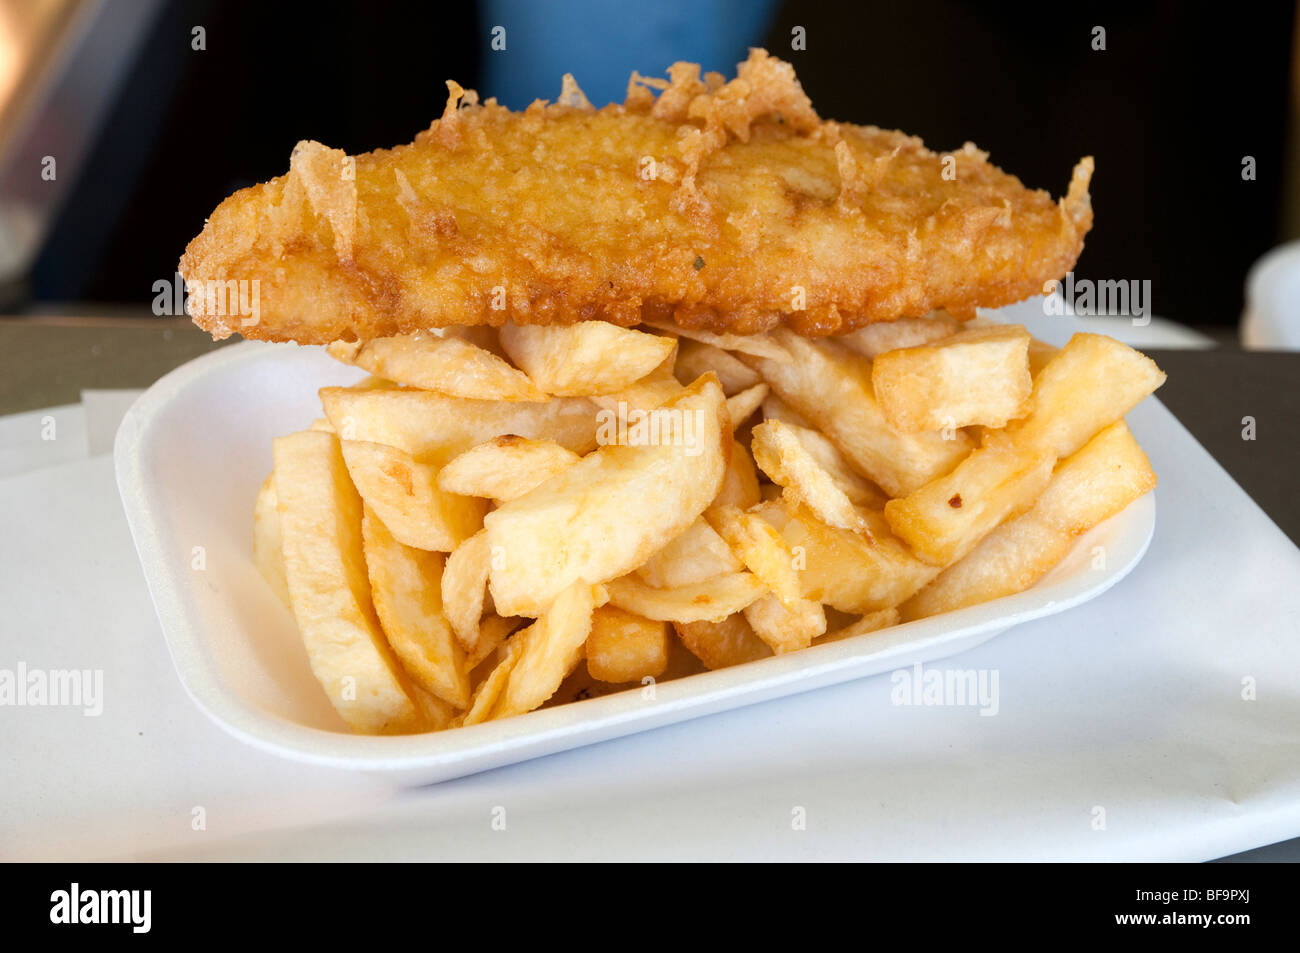 Fish and chips, UK Stock Photo